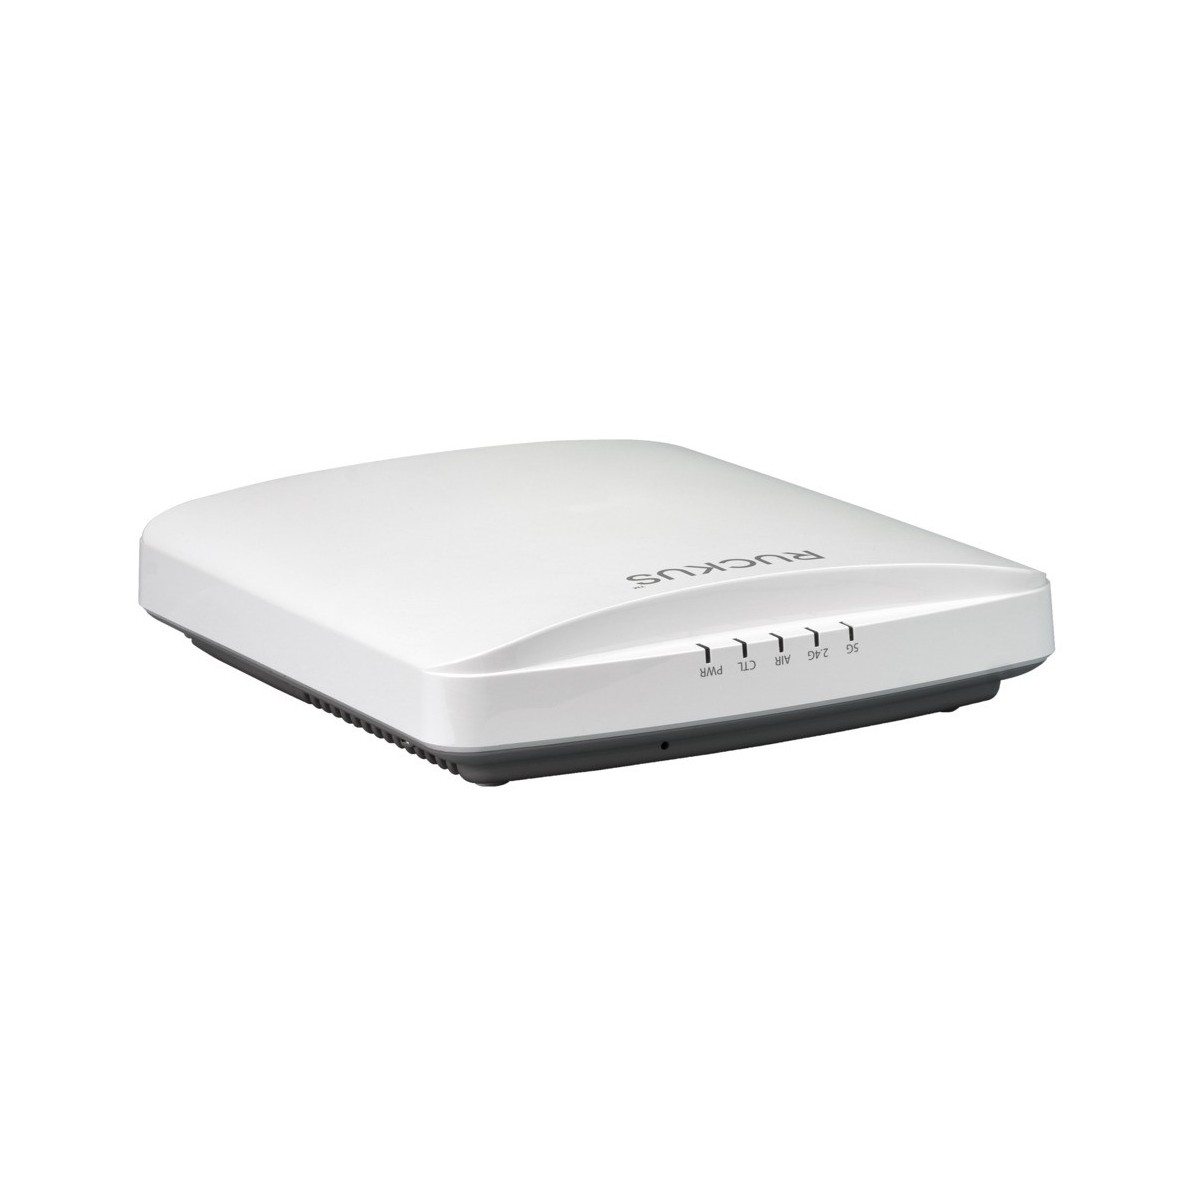 Ruckus R650 Unleashed dual-band 802.11abgn-ac-ax - Access Point - Ethernet